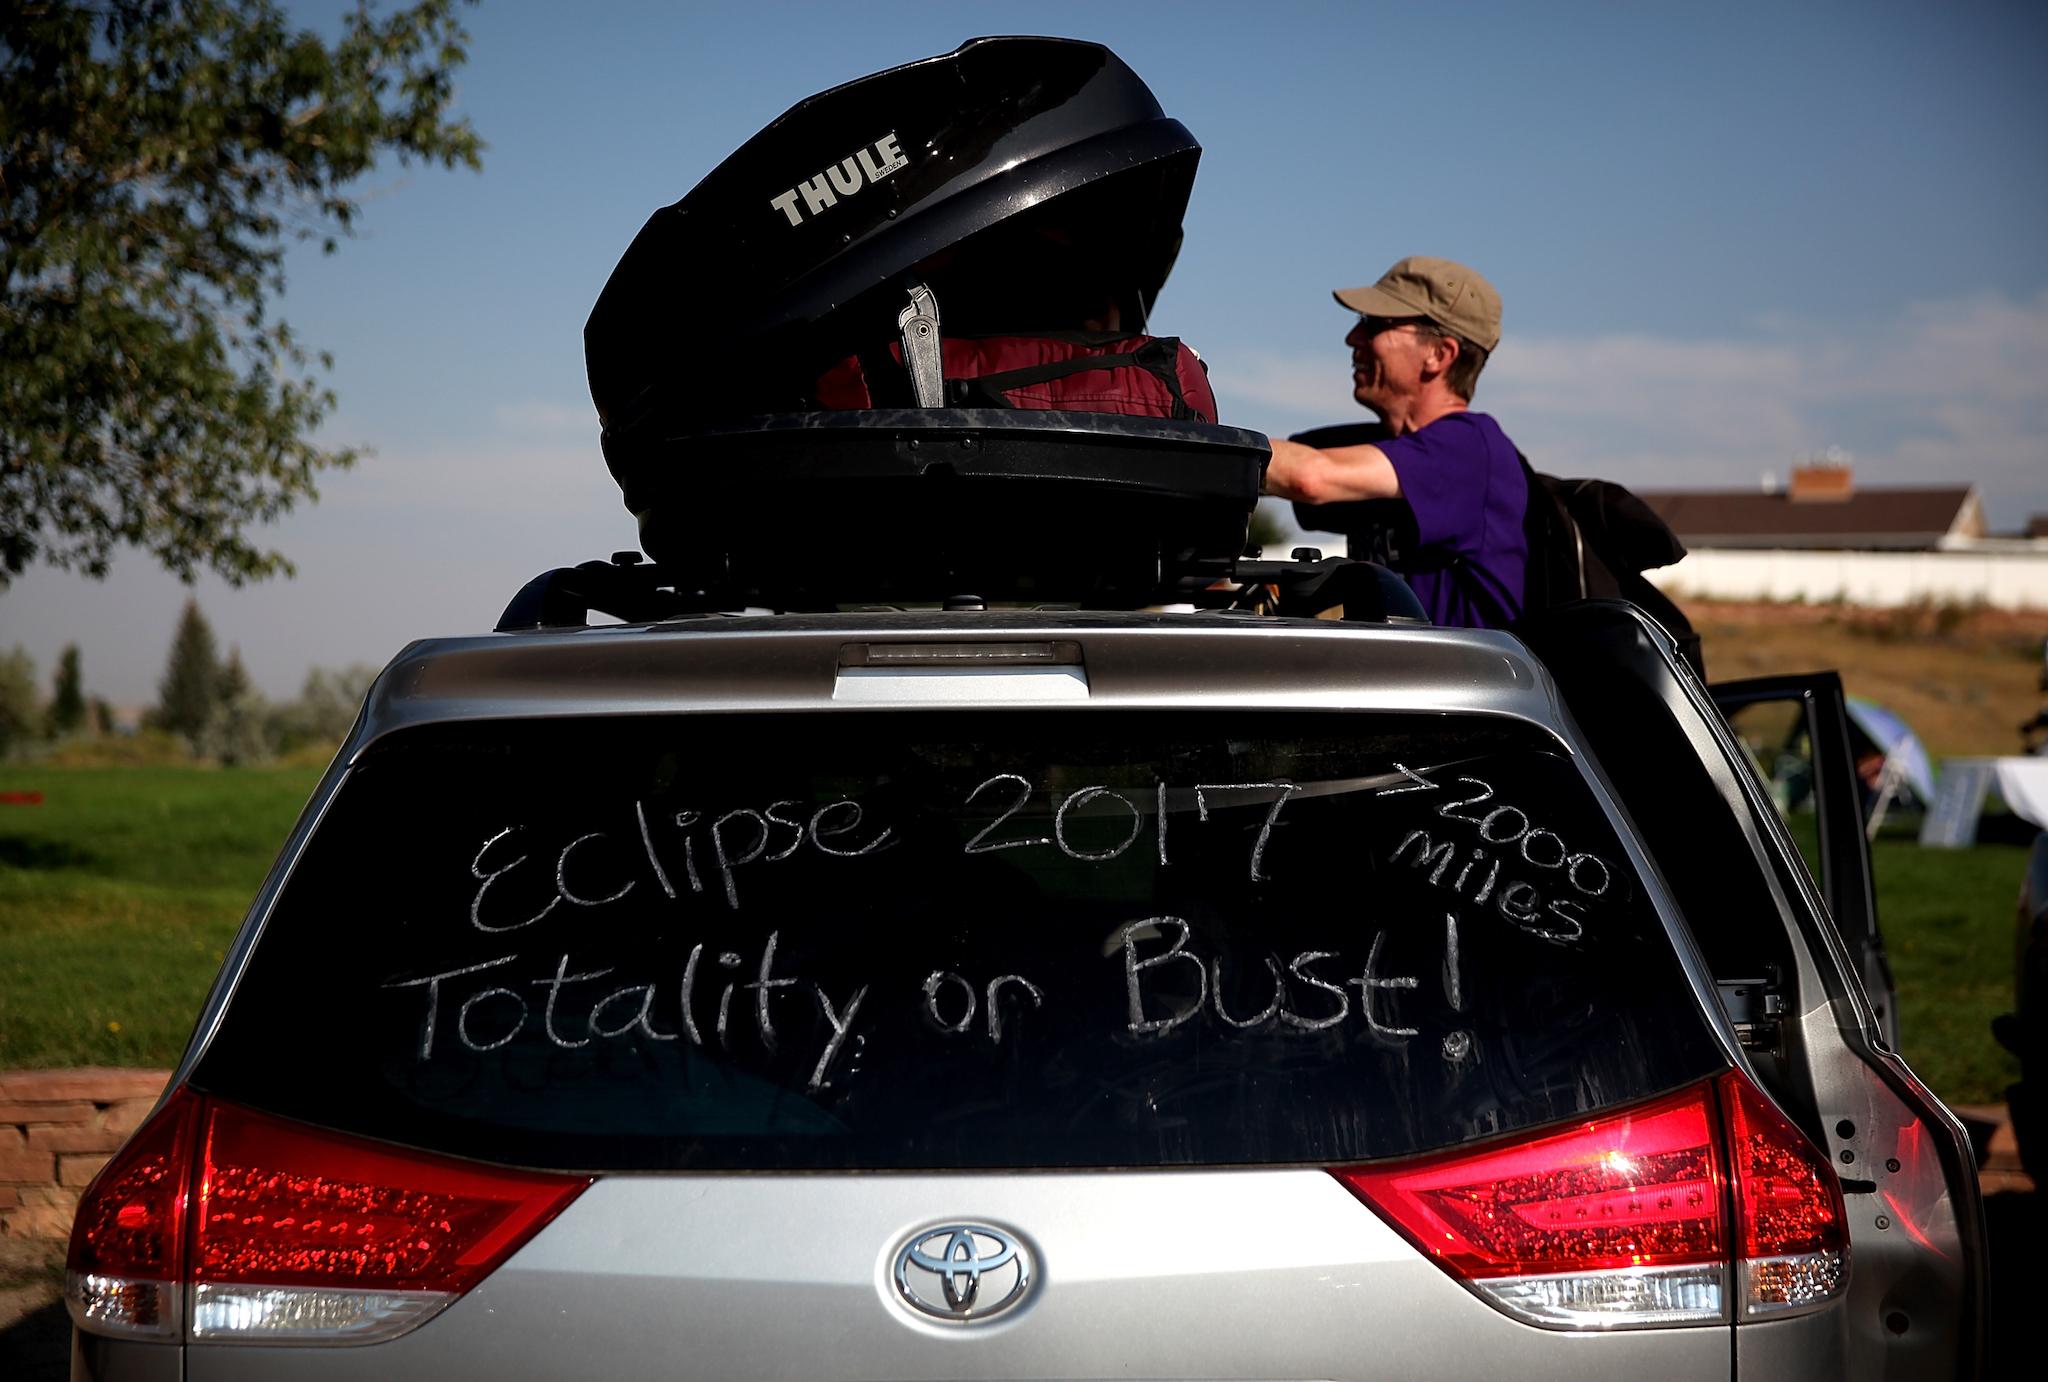 Solar eclipse safety: Where can I get a pair of glasses ...